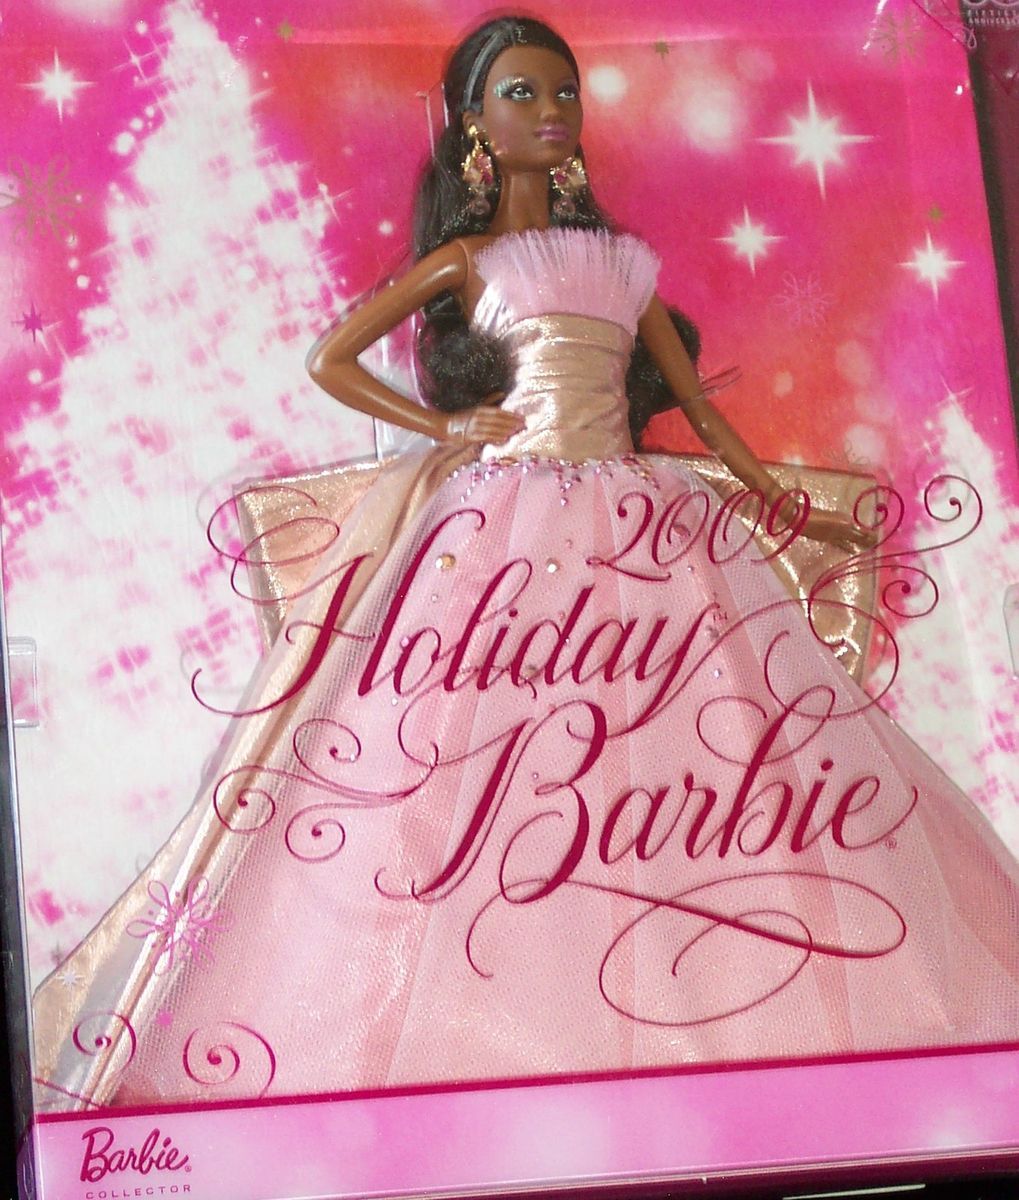 HOLIDAY BARBIE 2009 AFRICAN AMERICAN on PopScreen